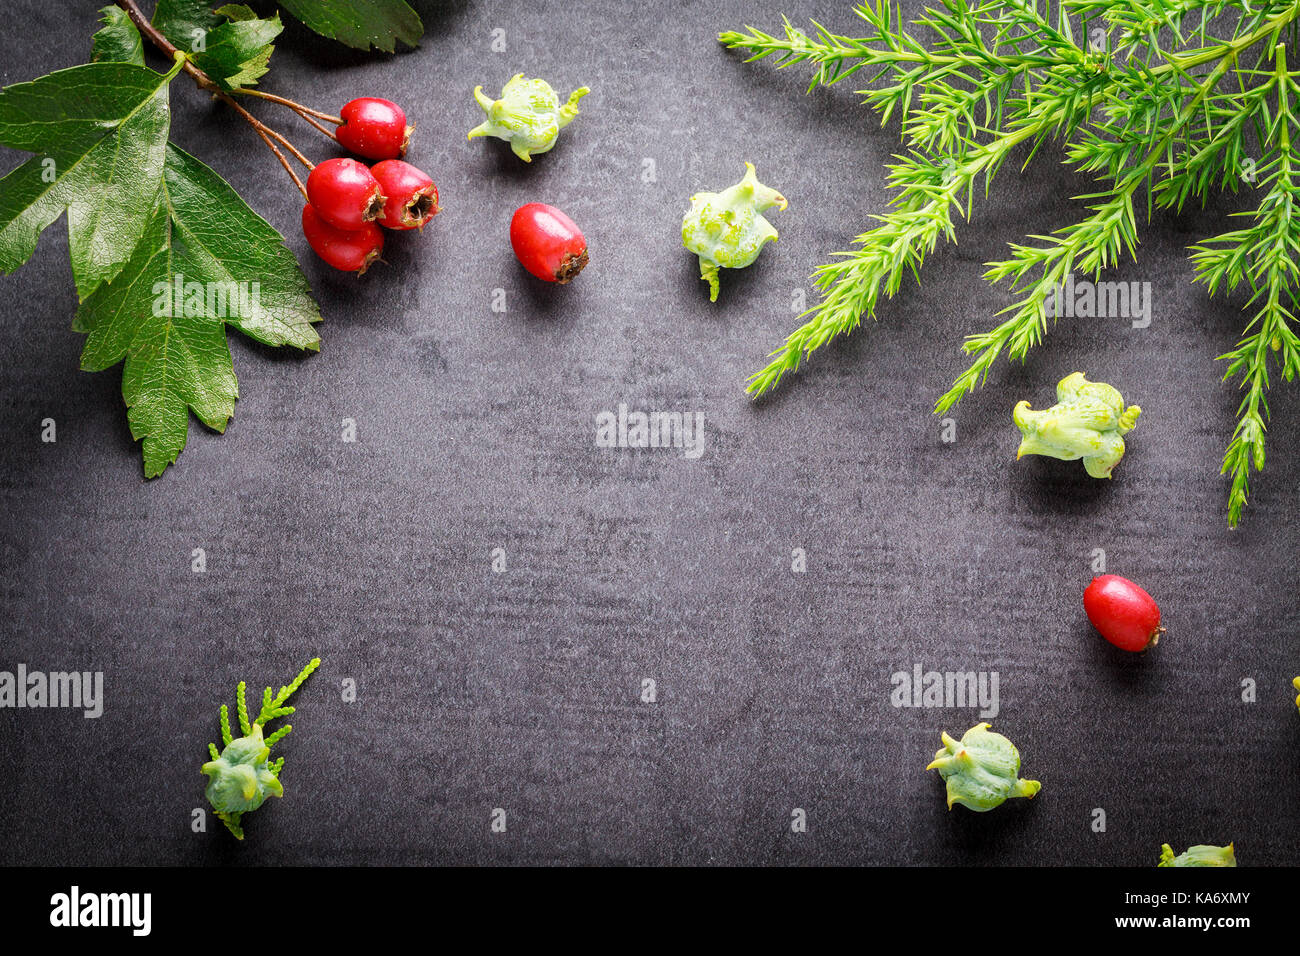 Decorative christmas background with green twigs and red berries. Stock Photo